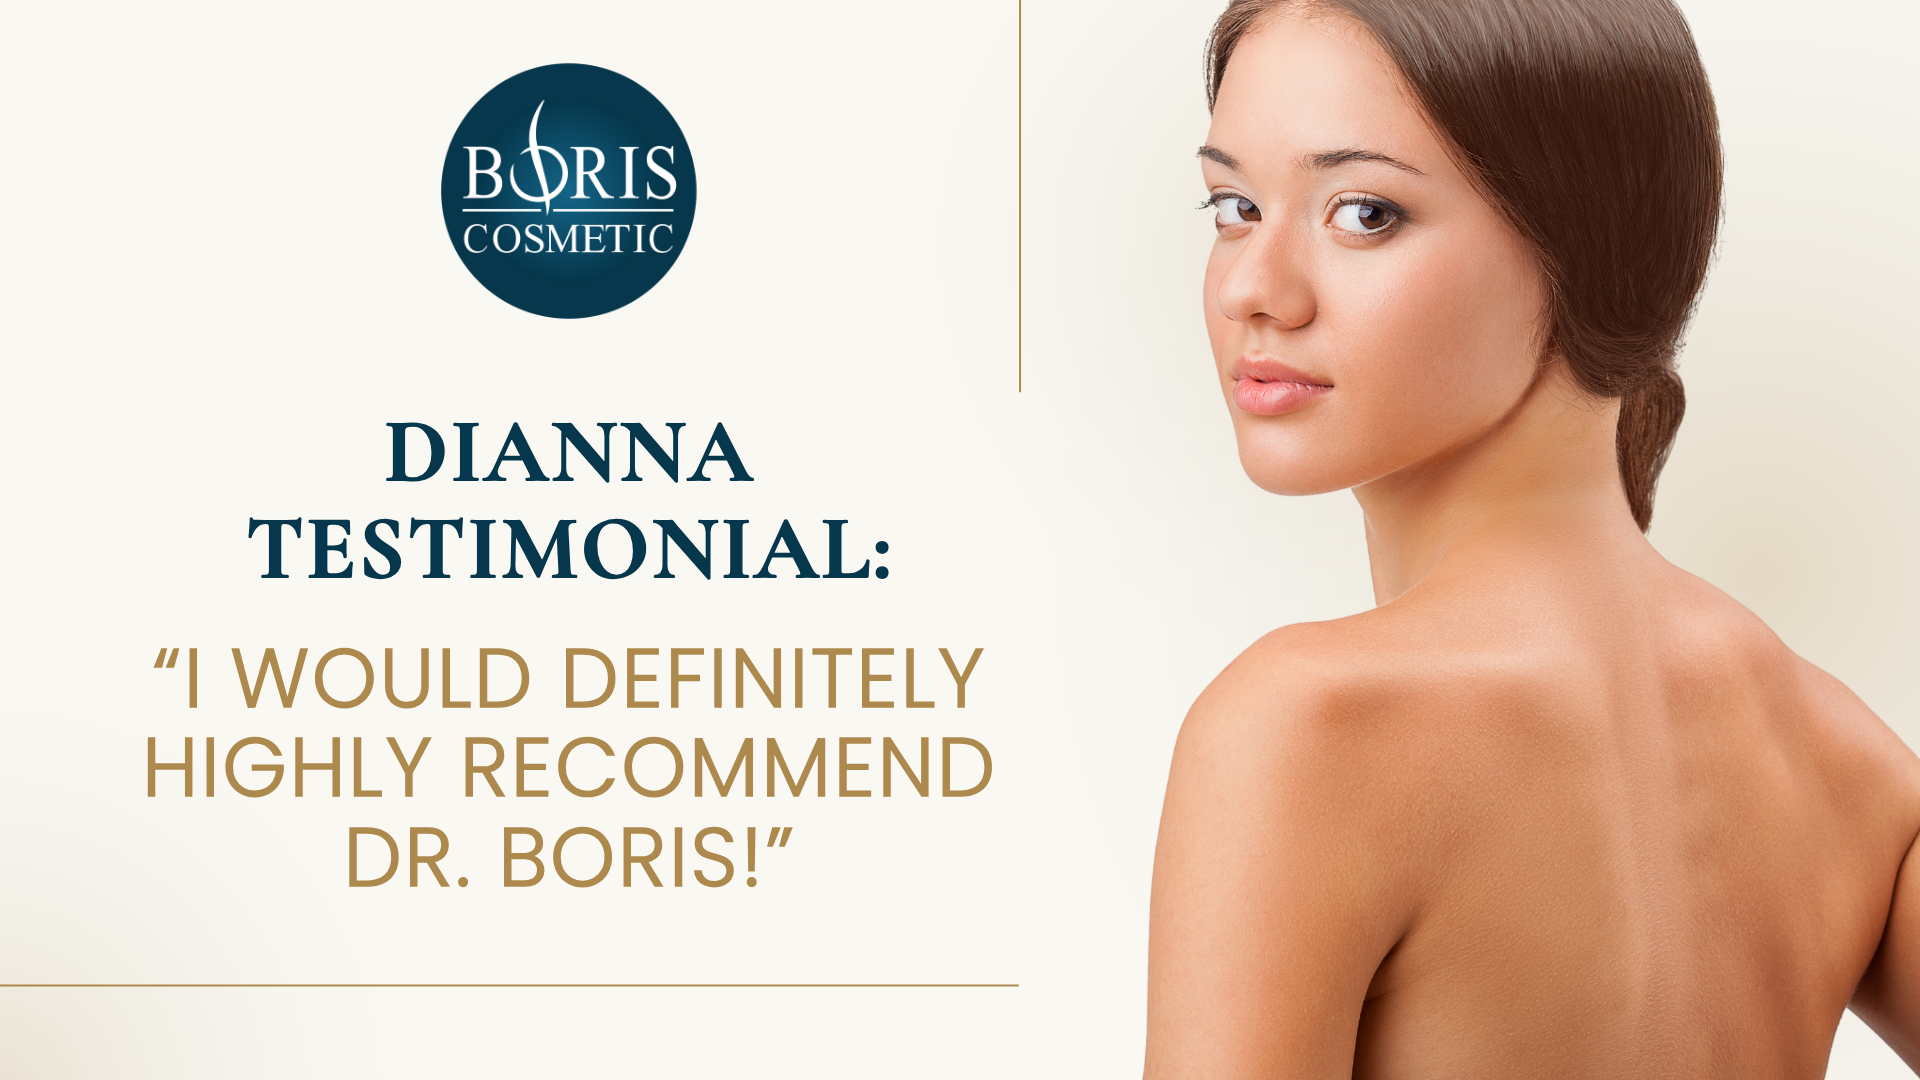 Dianna Testimonial and Experience with Boris Cosmetic in Los Angeles